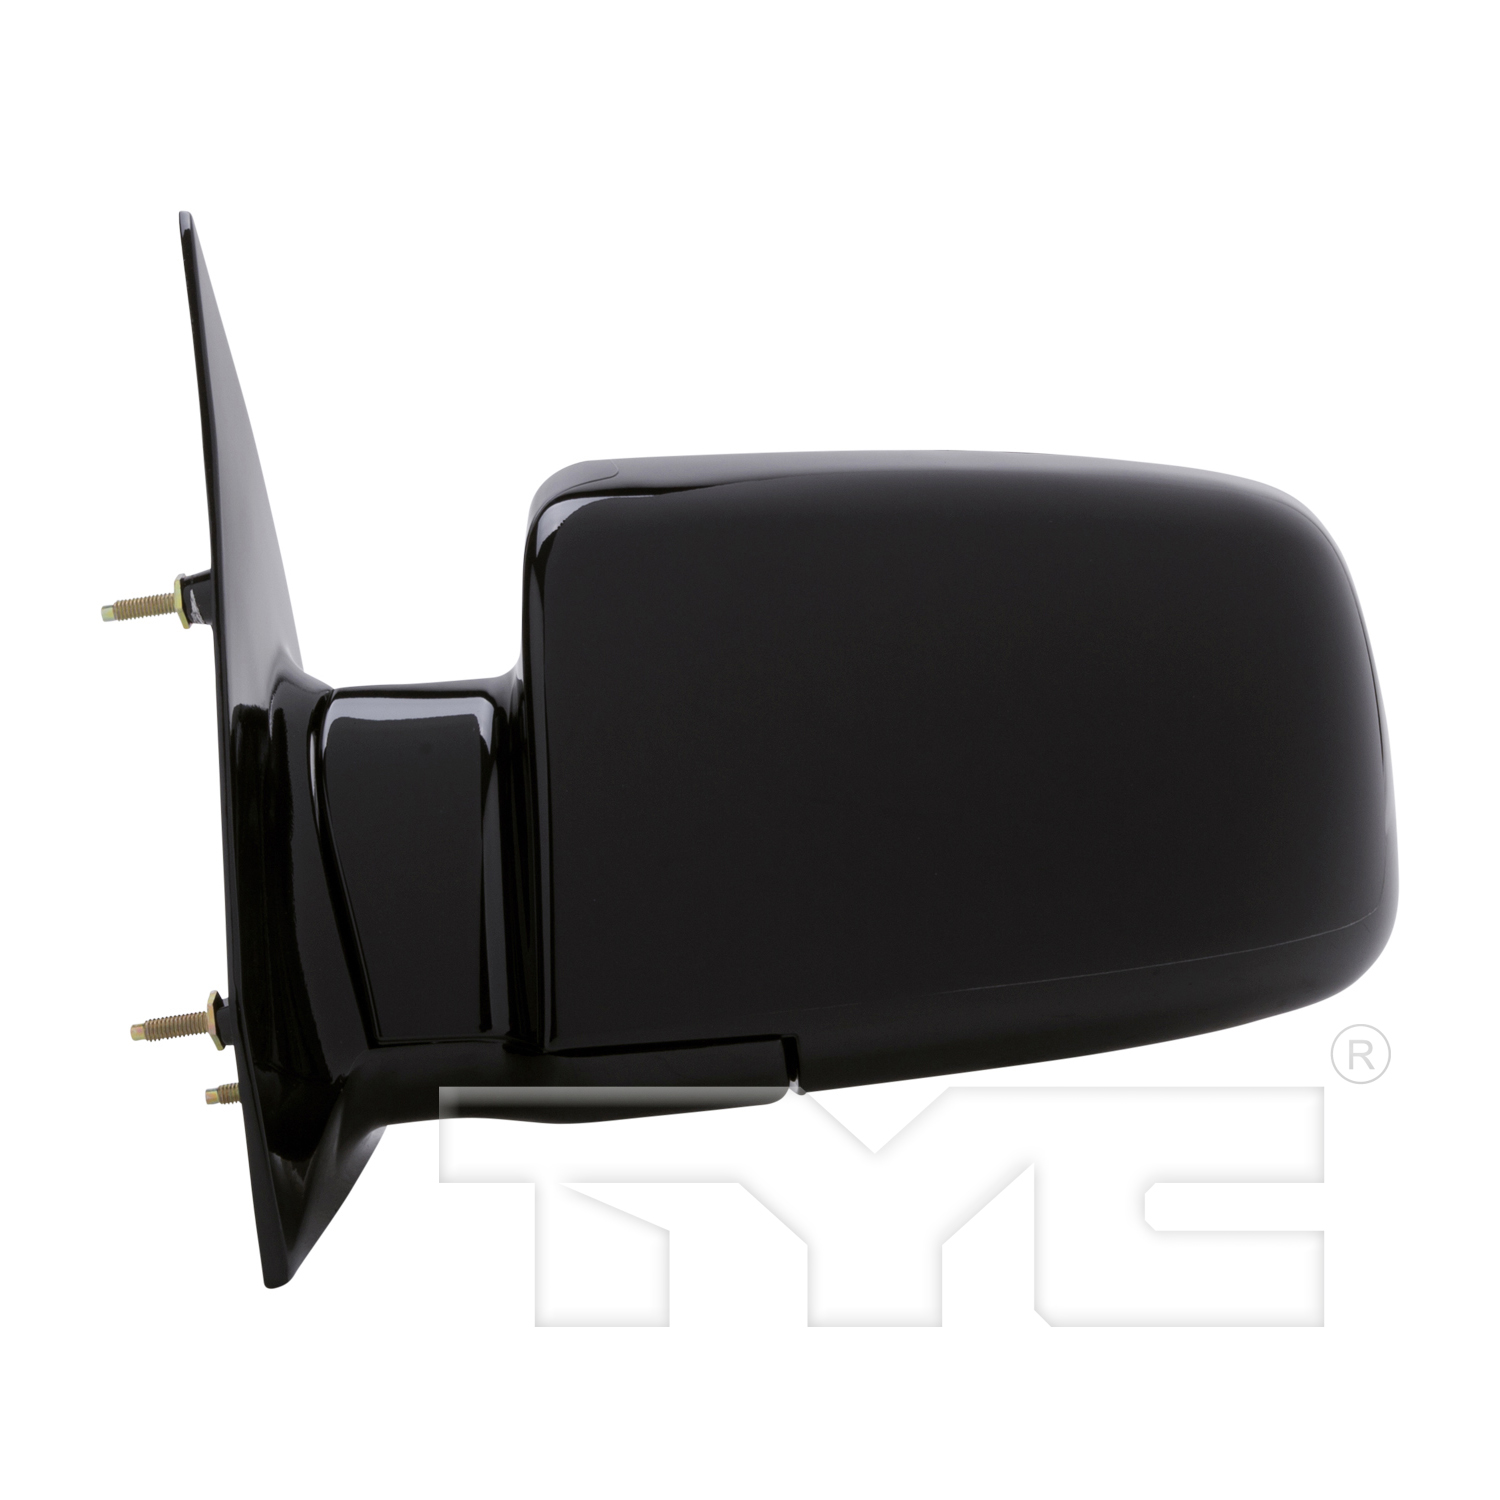 Aftermarket MIRRORS for CHEVROLET - ASTRO, ASTRO,88-05,LT Mirror outside rear view